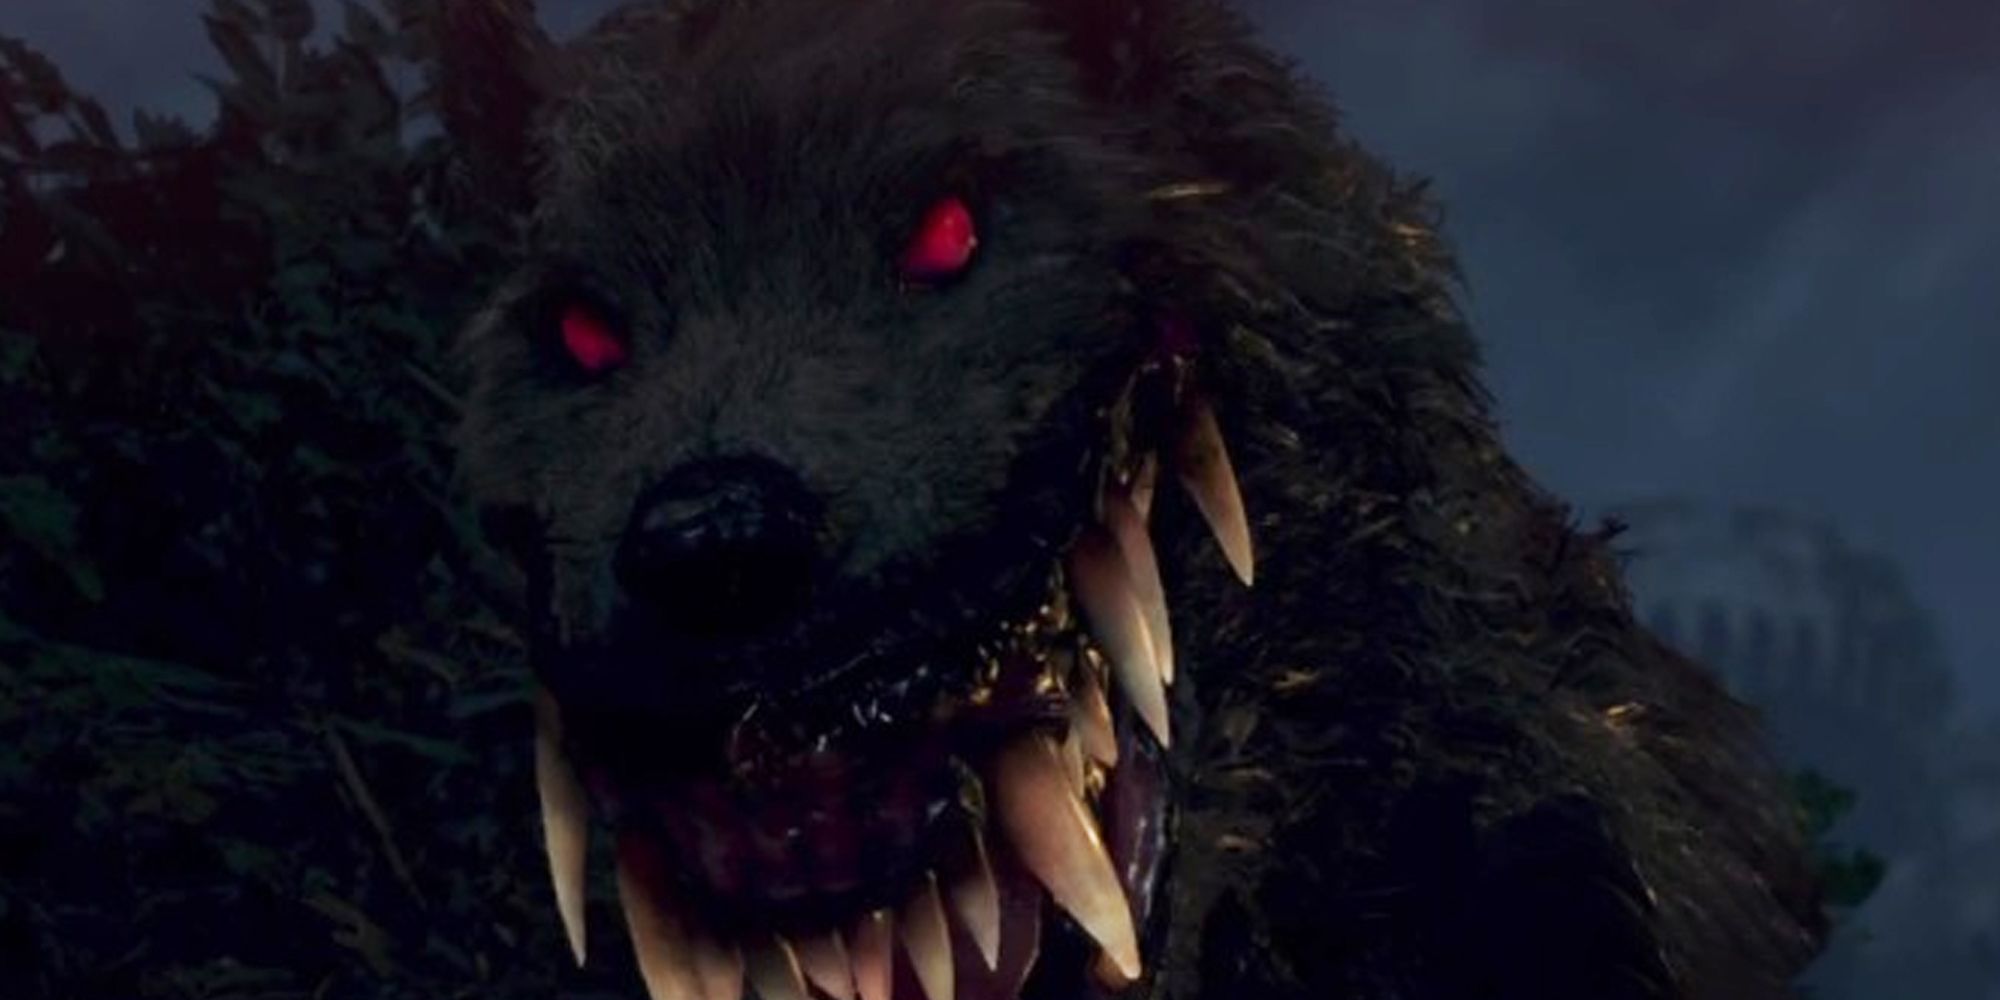 Resident Evil 4 Remake wolf enemy grinning with giant teeth and bright red eyes